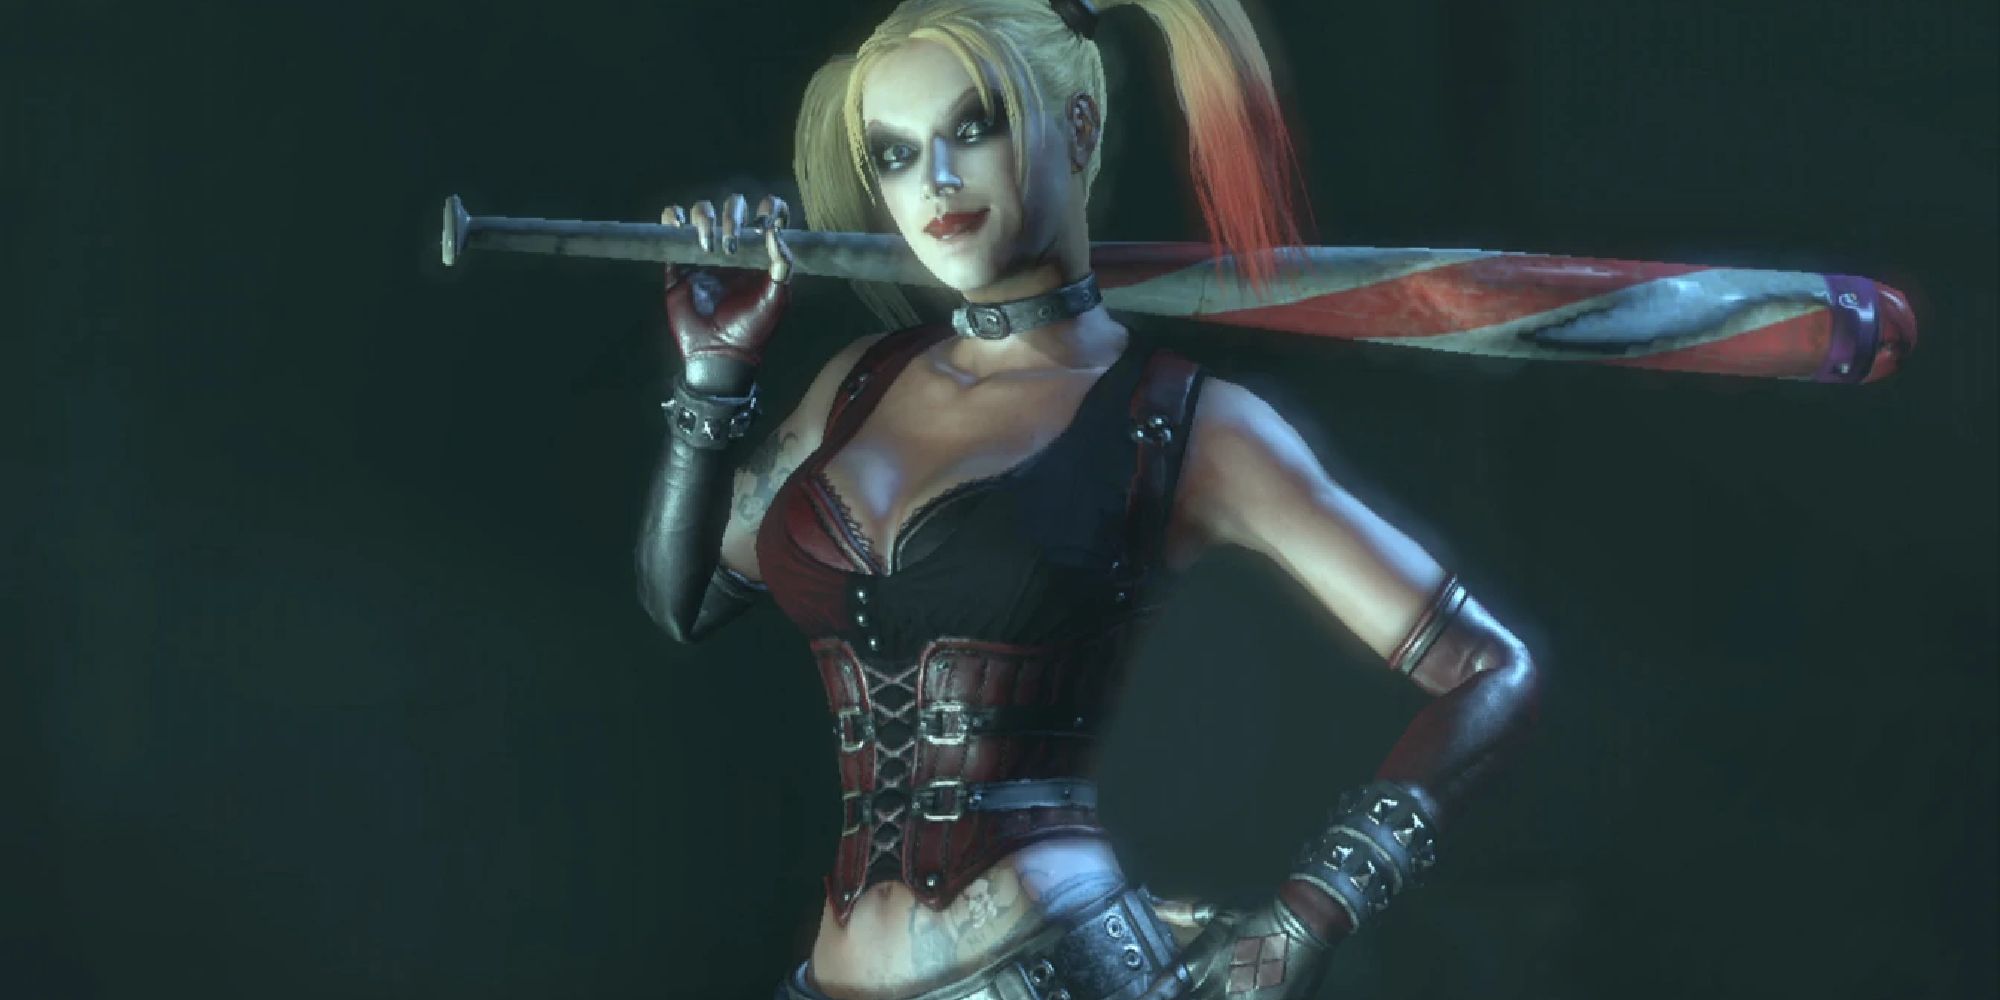 Harley Quinn sporting her red and black look, resting a baseball menacingly on her shoulder even as she grins mockingly.